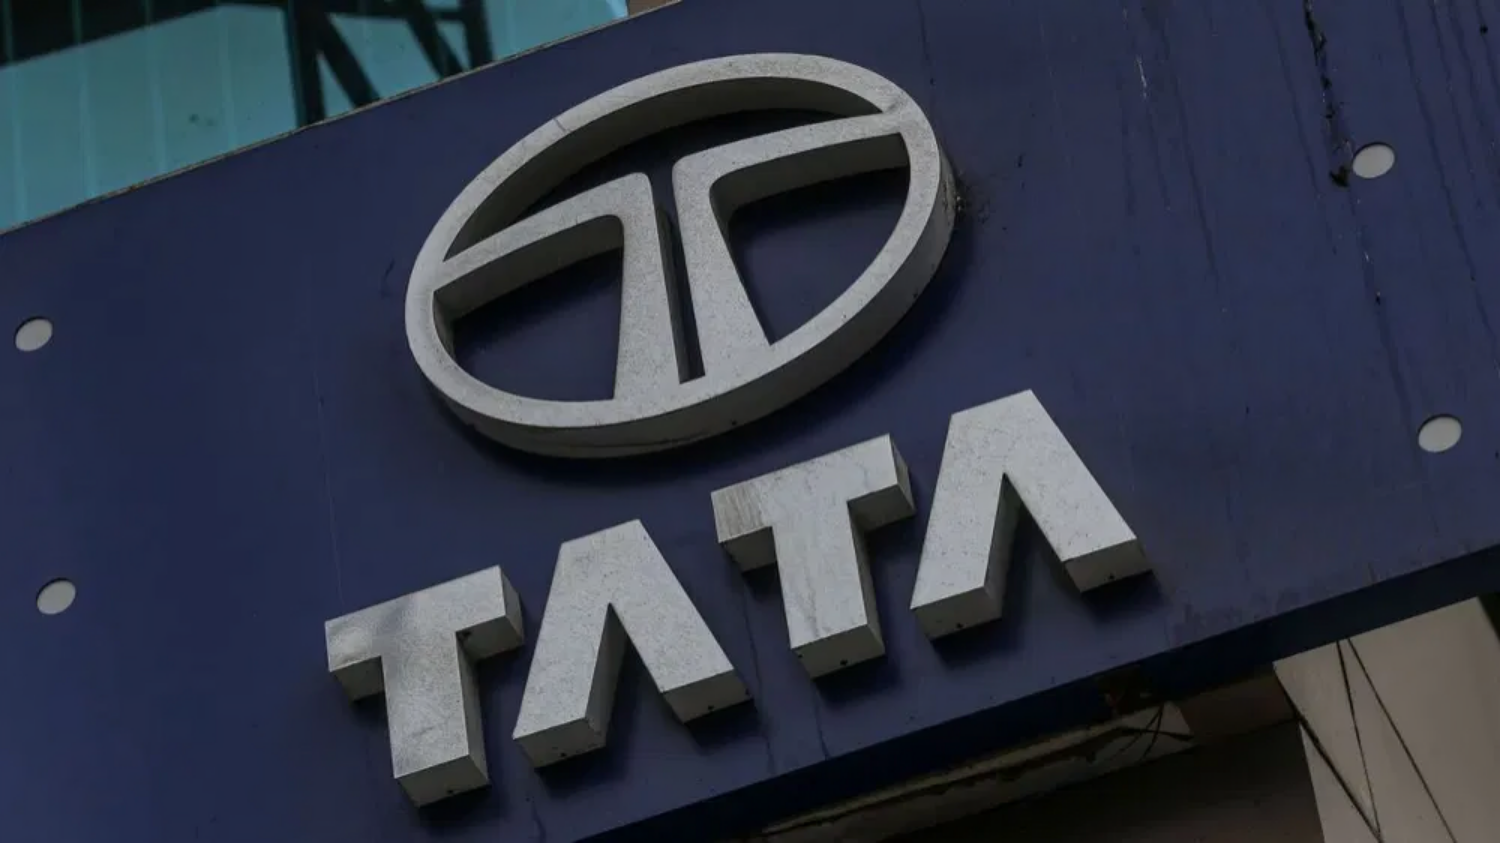 Picture of Tata Demerger: Tata Motors will split its business into two, both companies will be listed on the stock market.